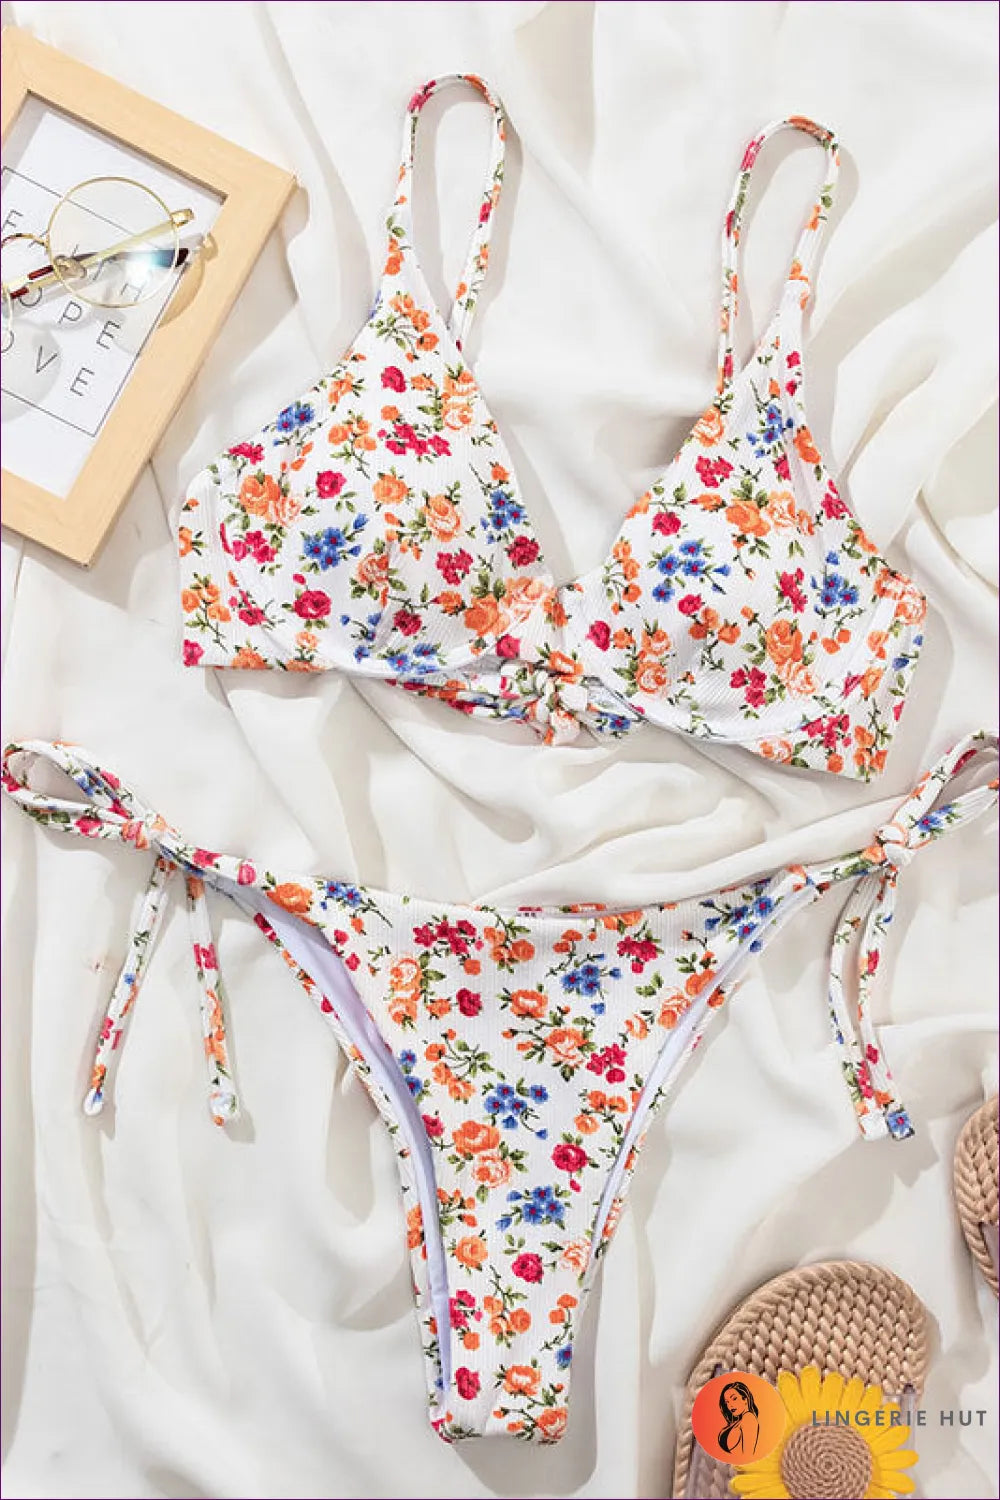 Get Ready To Embrace Your Beach Bohemian Spirit With Our Boho Floral Lace Print Bikini Swimsuit! Complete